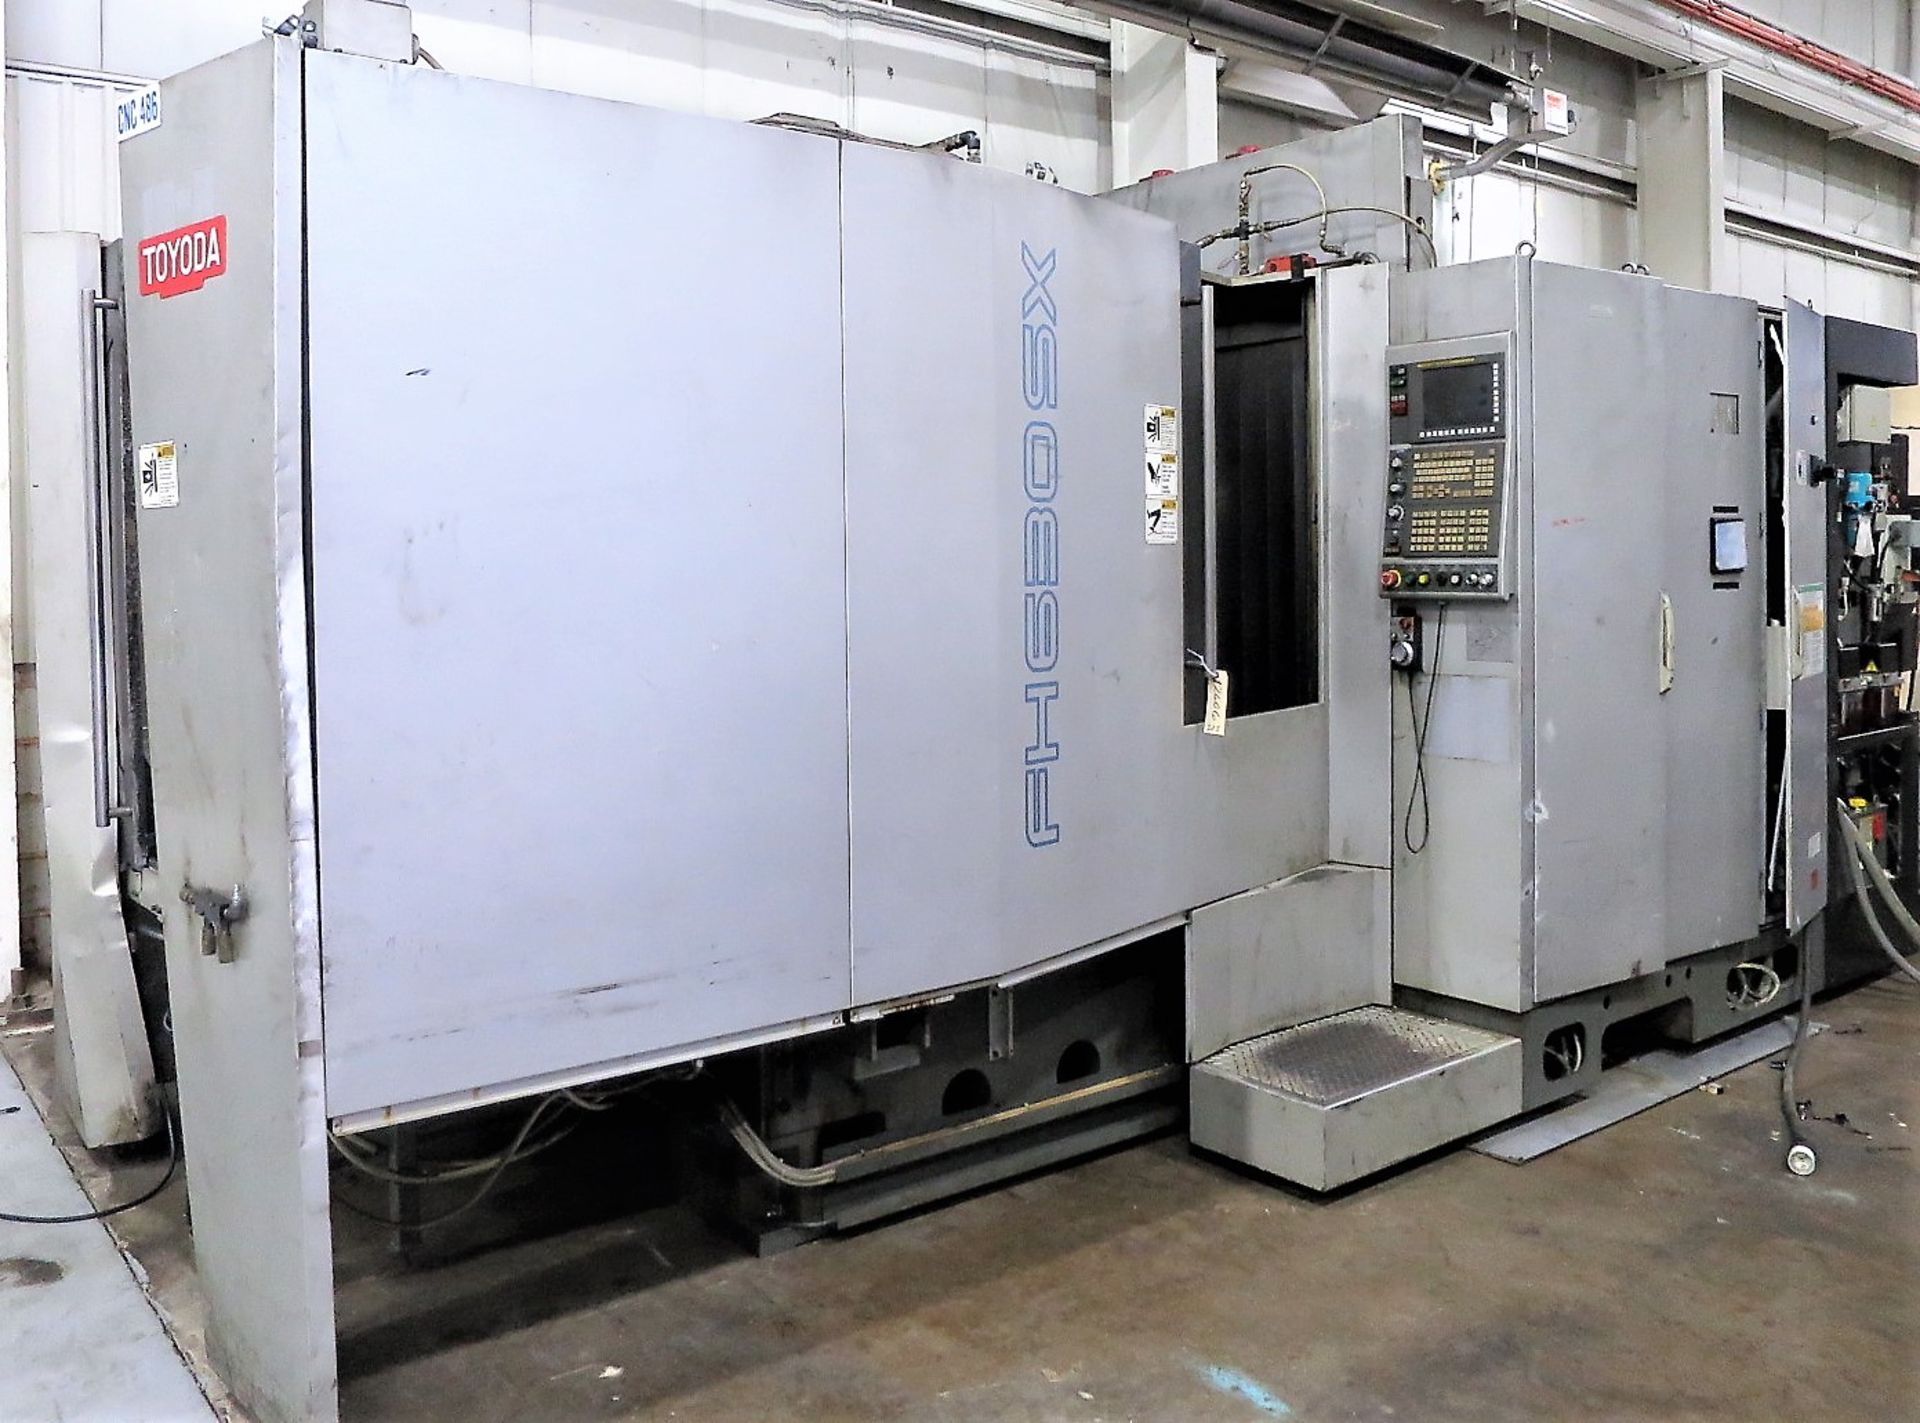 24.8 X 24.8 Pallets Toyoda FH630SX CNC 4-Axis Horizontal Machining Center, S/N NS1429, New 12/2005 - Image 2 of 14